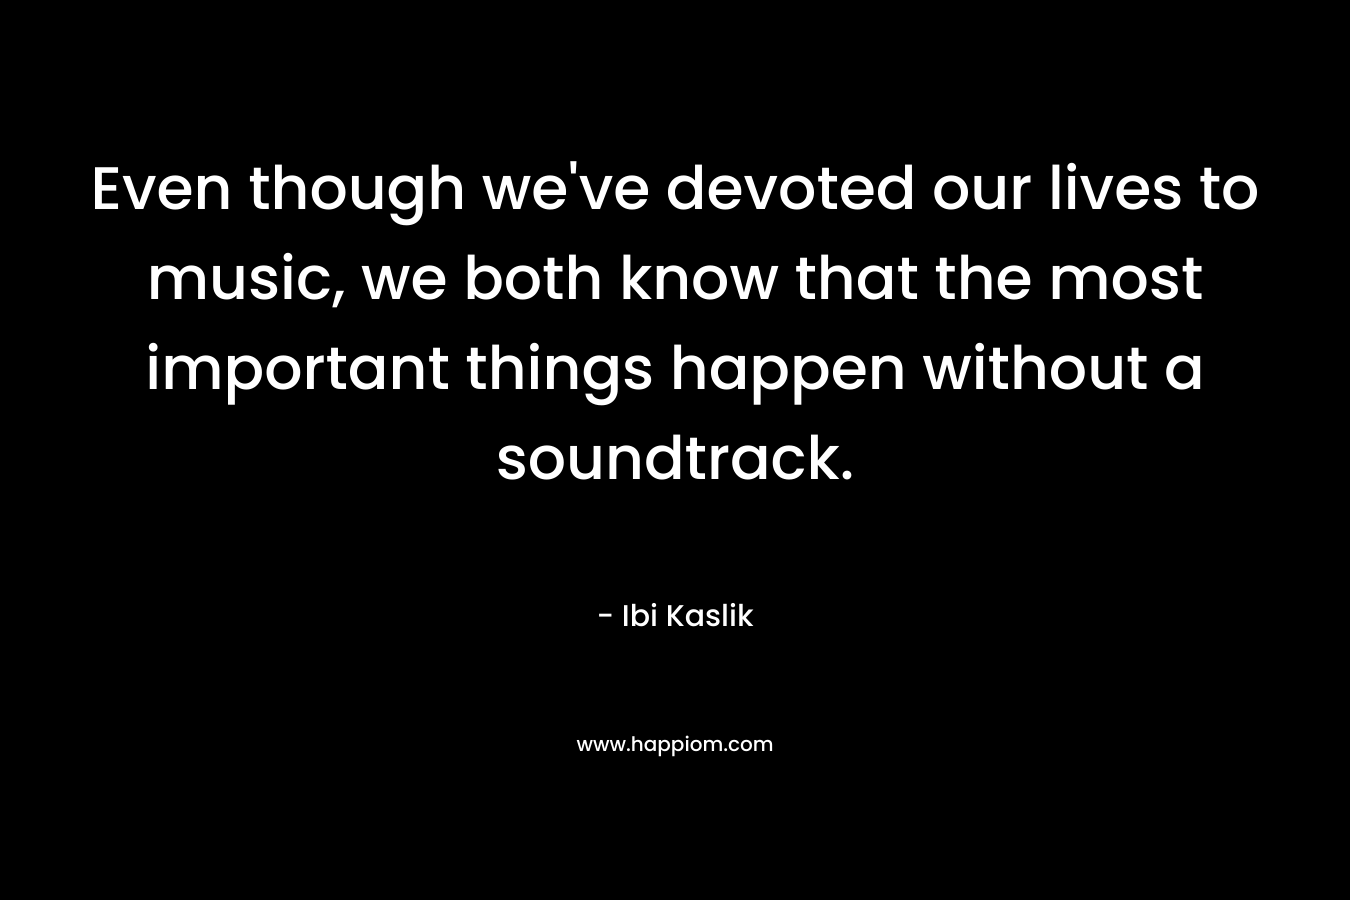 Even though we’ve devoted our lives to music, we both know that the most important things happen without a soundtrack. – Ibi Kaslik